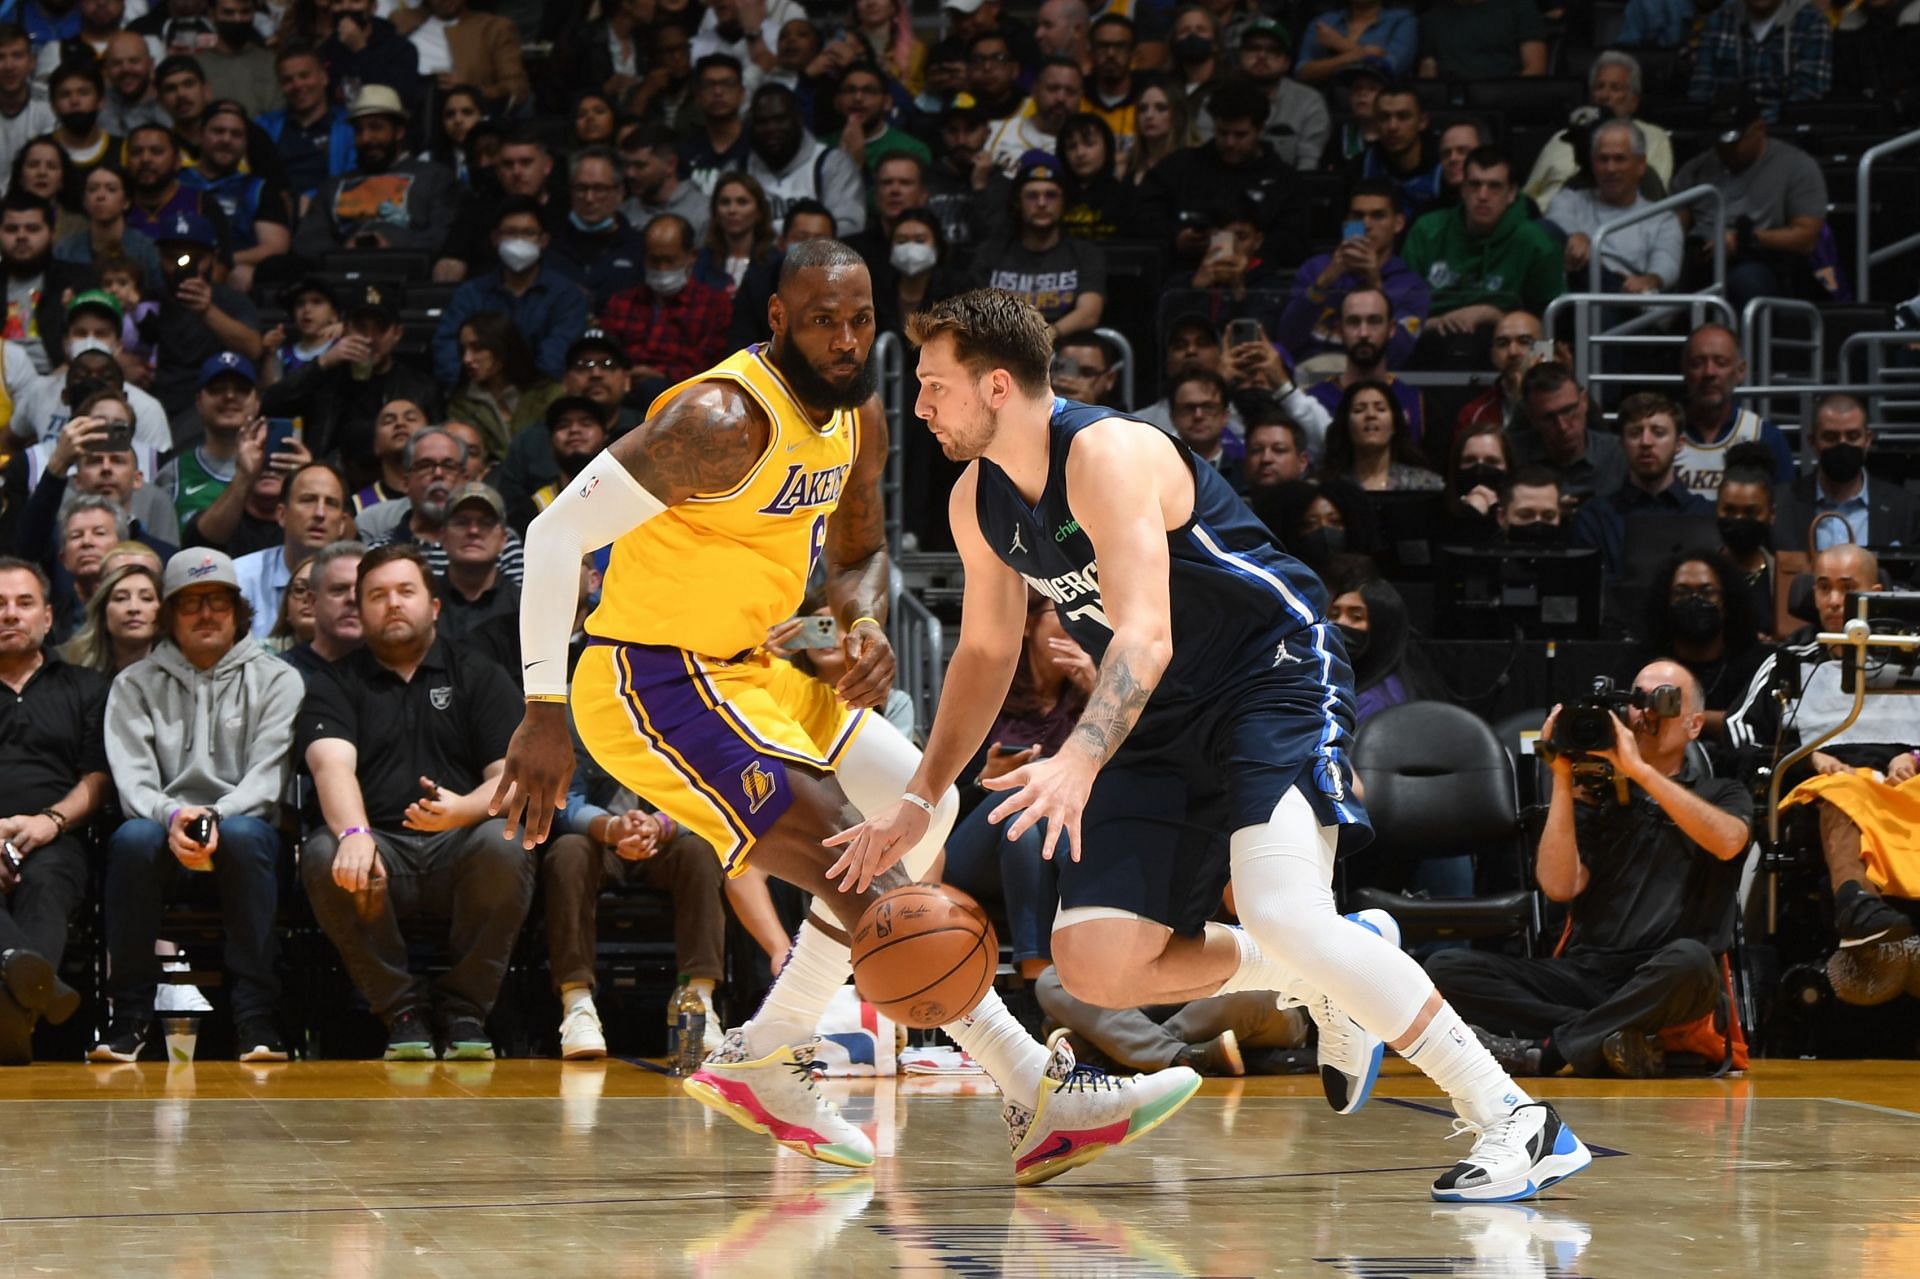 Luka Doncic was unstoppable in the crucial moments against LeBron James in carrying the Dallas Mavericks past the LA Lakers. [Photo: TechiAzi]